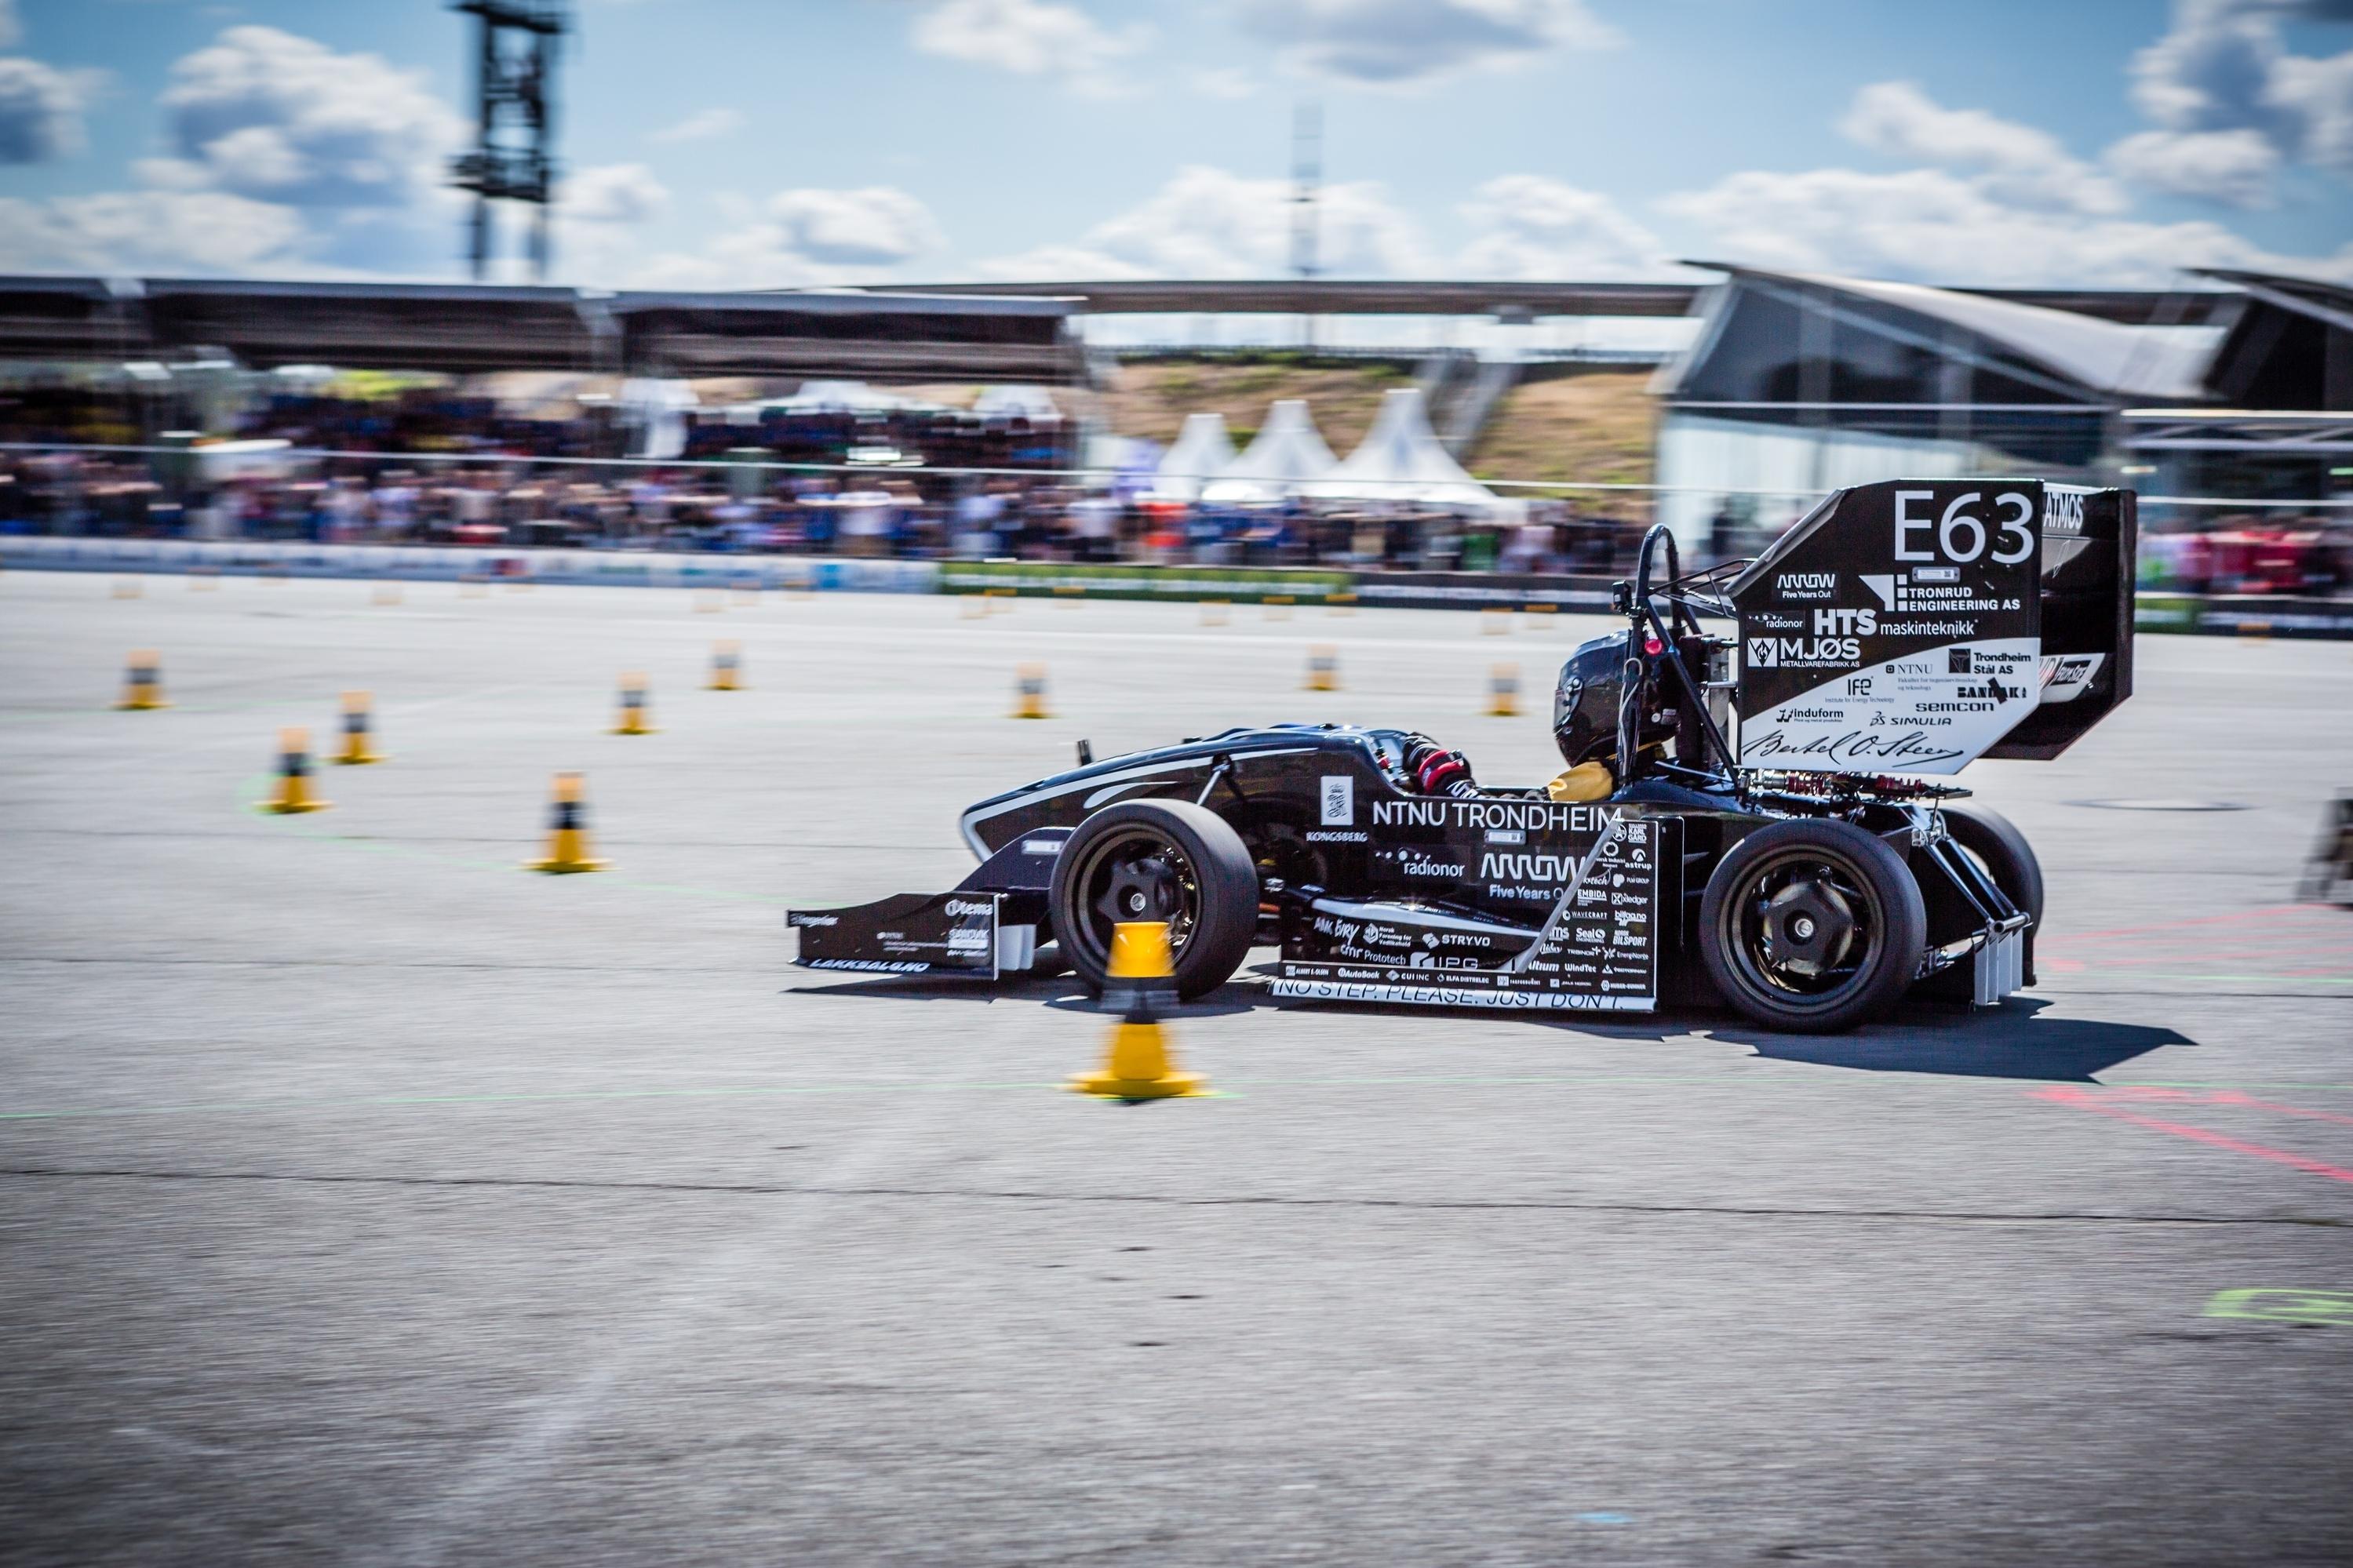 Racing car built on 3D-printed parts from TE